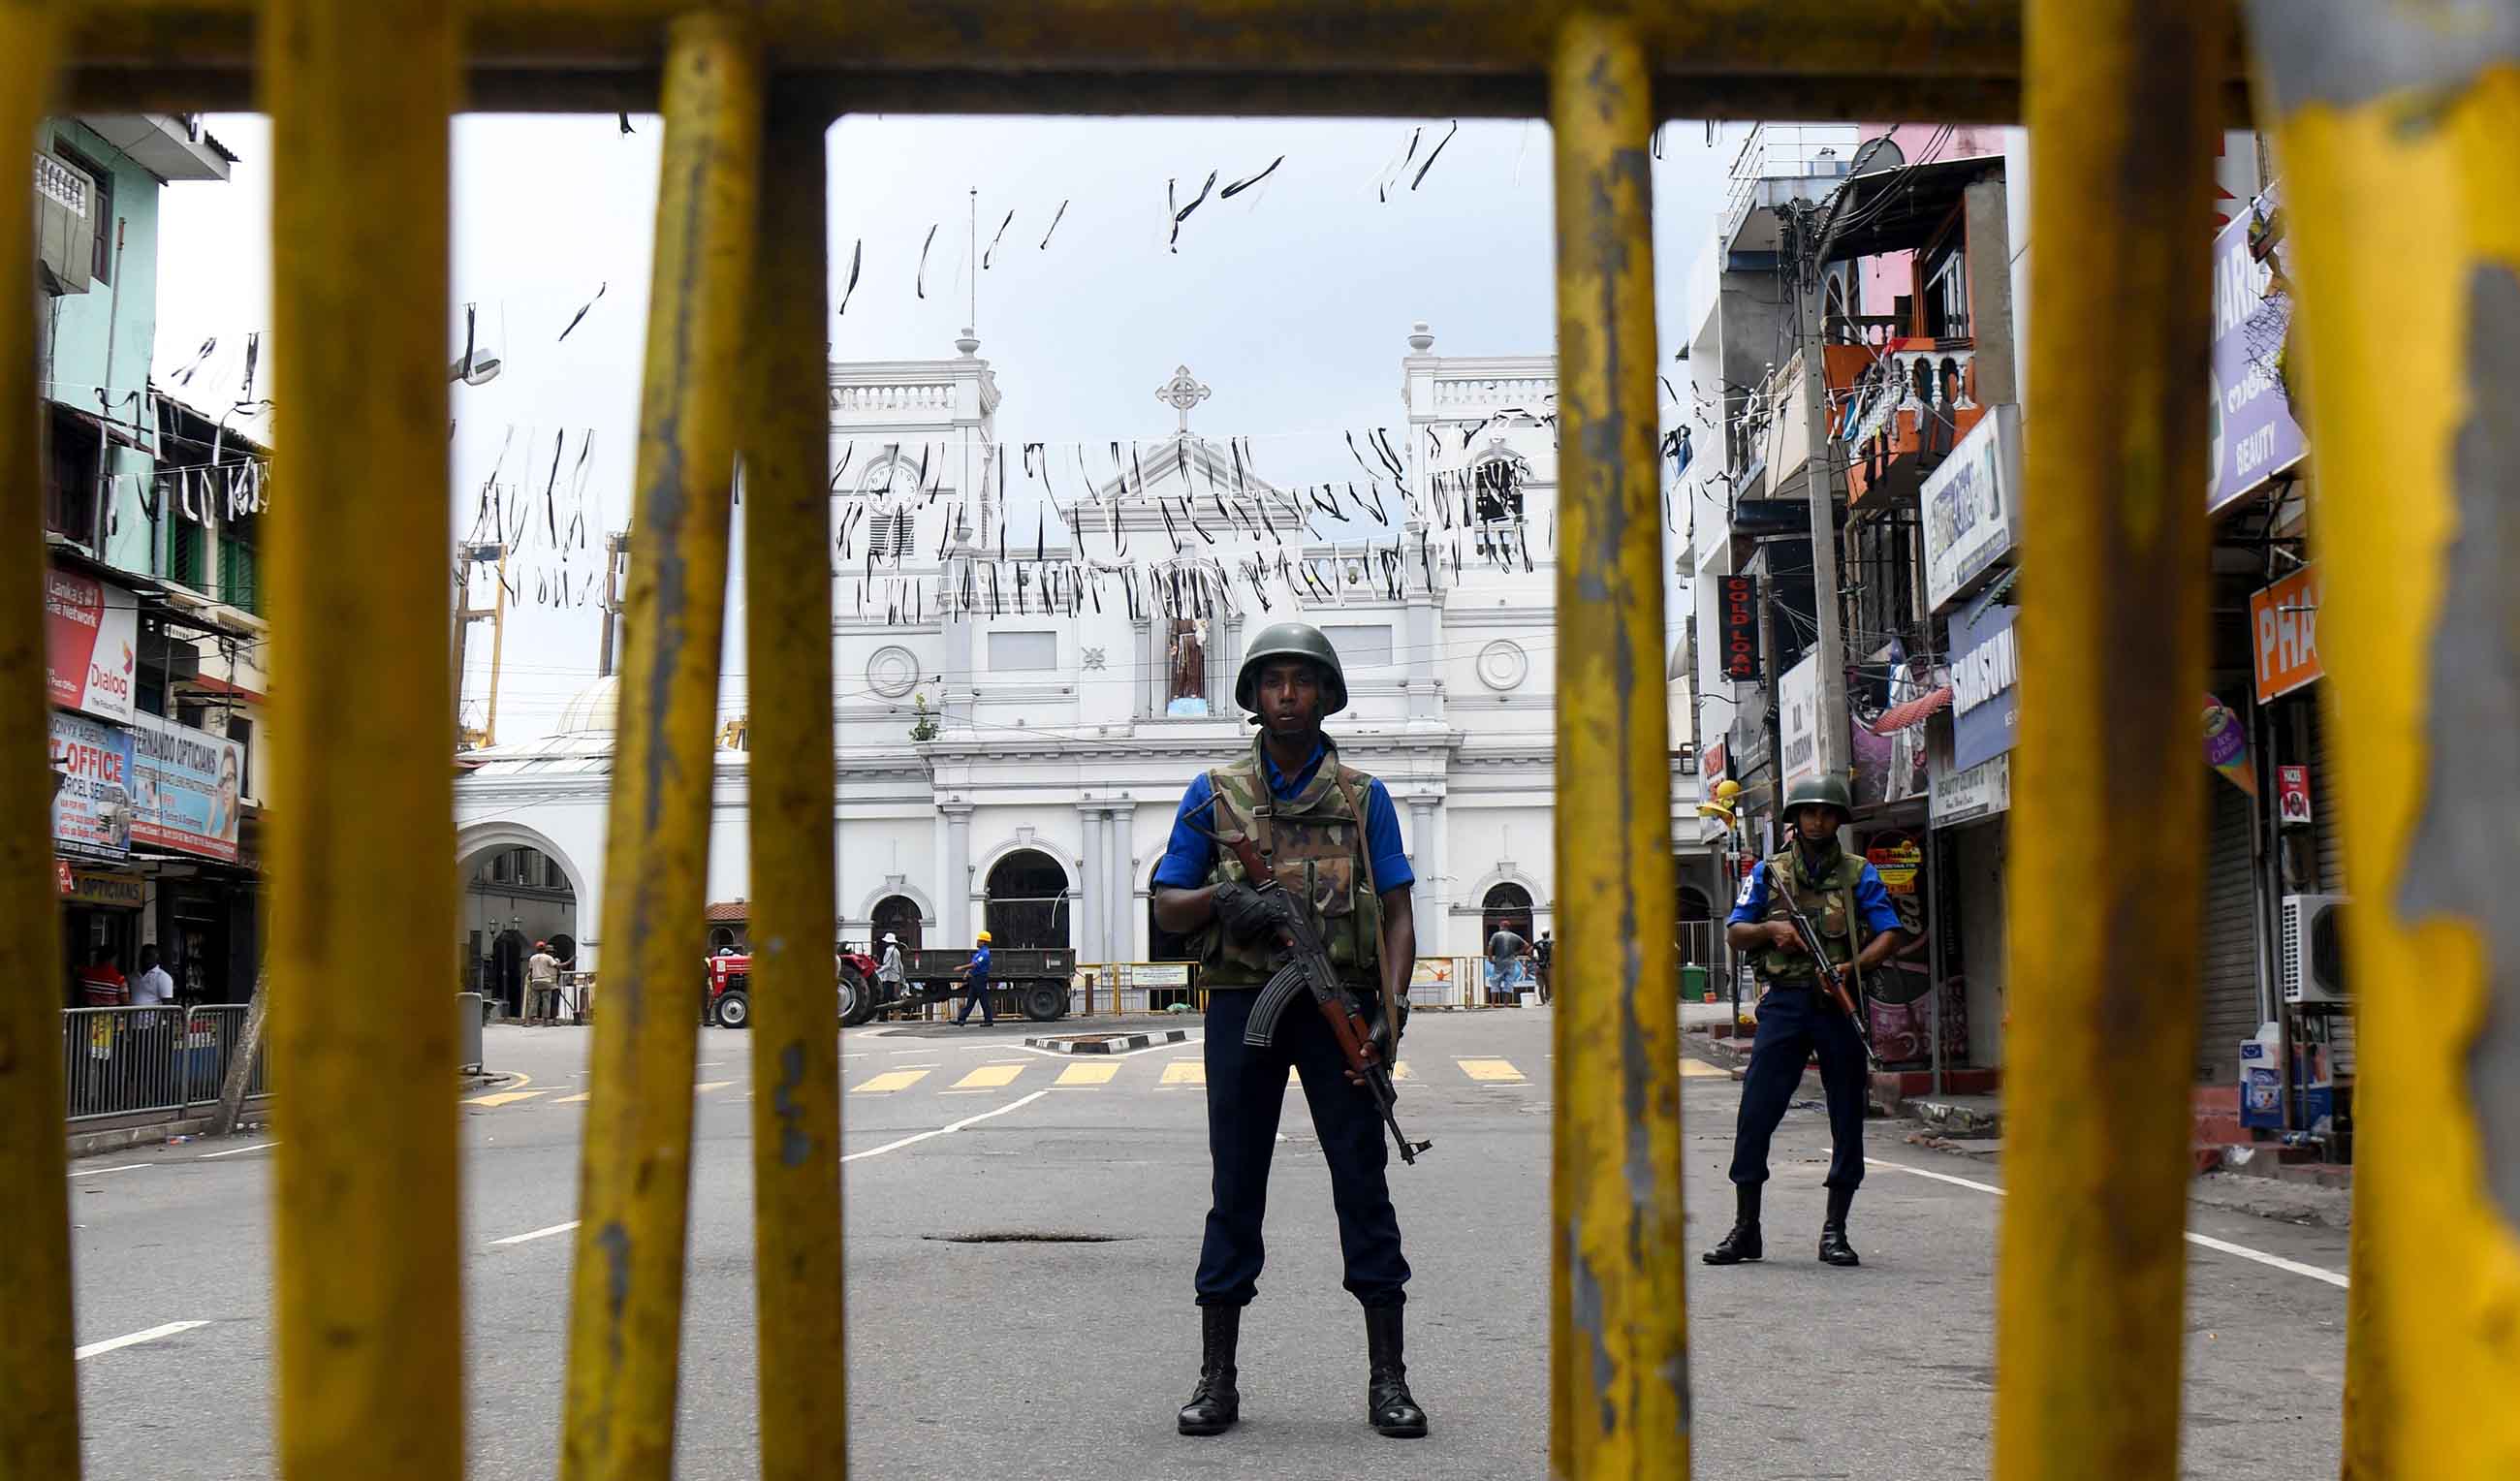 Sri Lankan soldiers stand guard outside St. Anthony's Shrine in Colombo on April 29, 2019, a week after a series of bomb blasts targeting churches and luxury hotels on Easter Sunday in Sri Lanka.